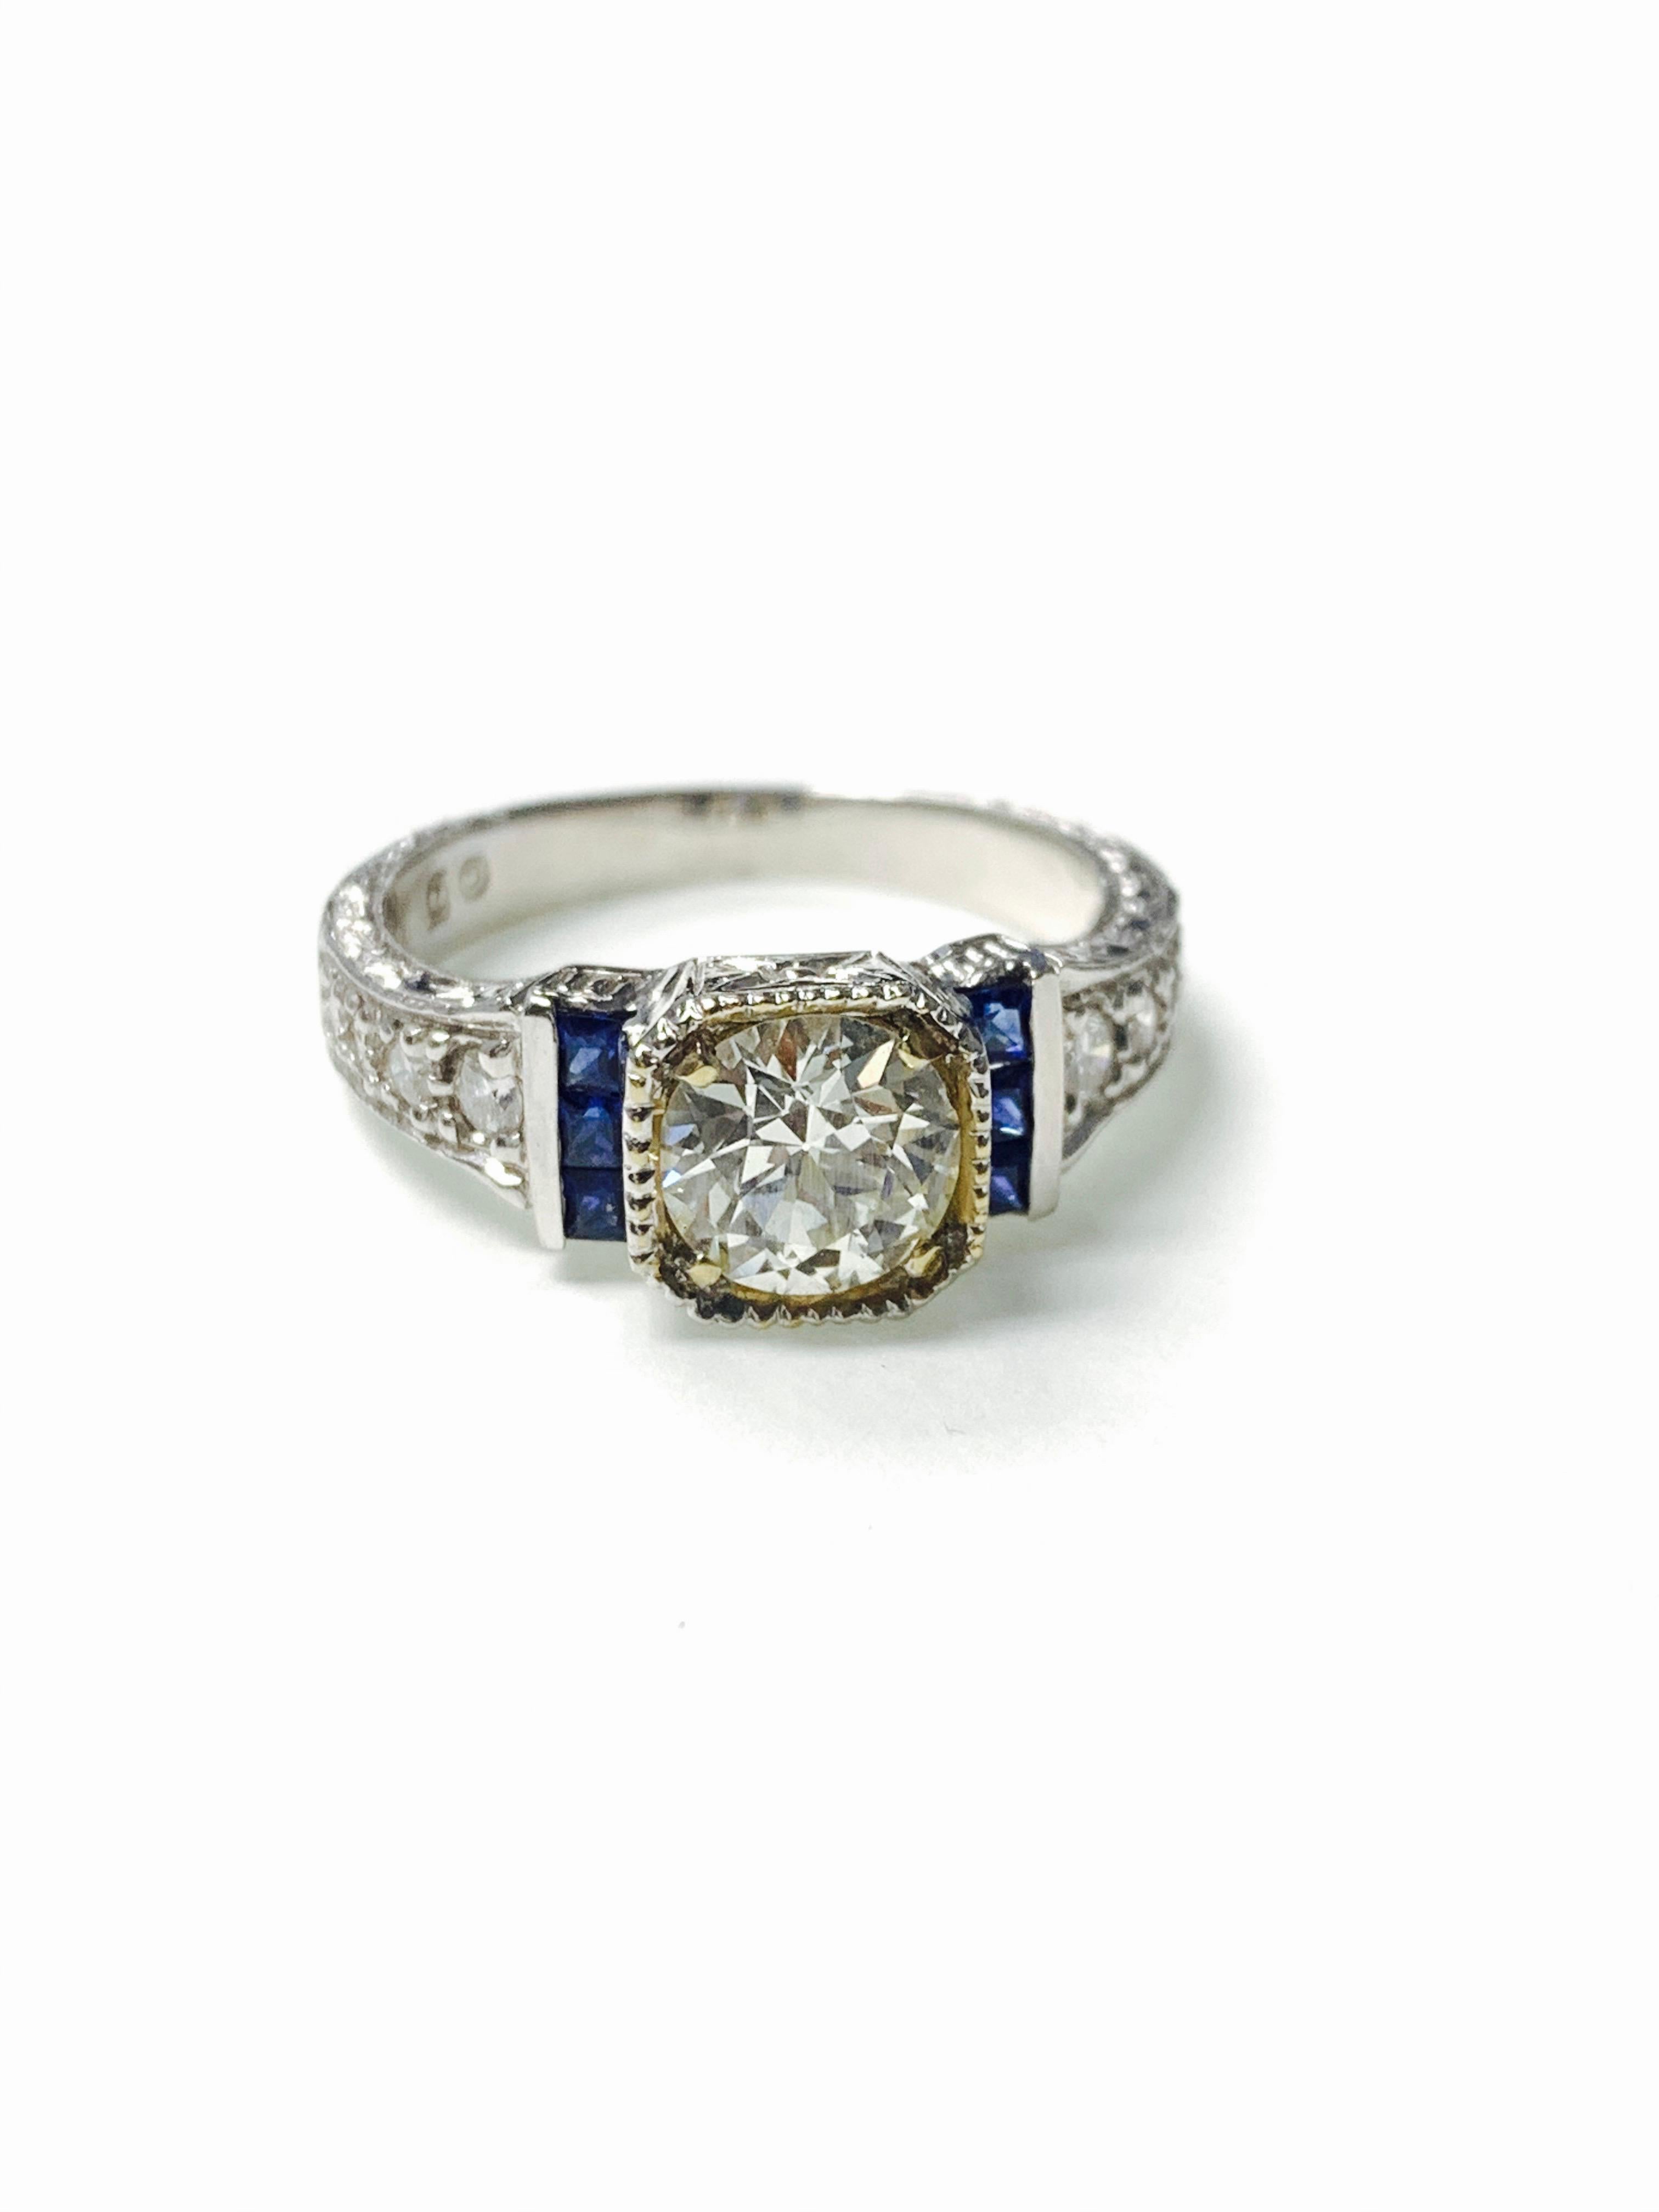 Women's White Old European Cut Diamond and Blue Sapphire Ring in 18 Karat Gold For Sale